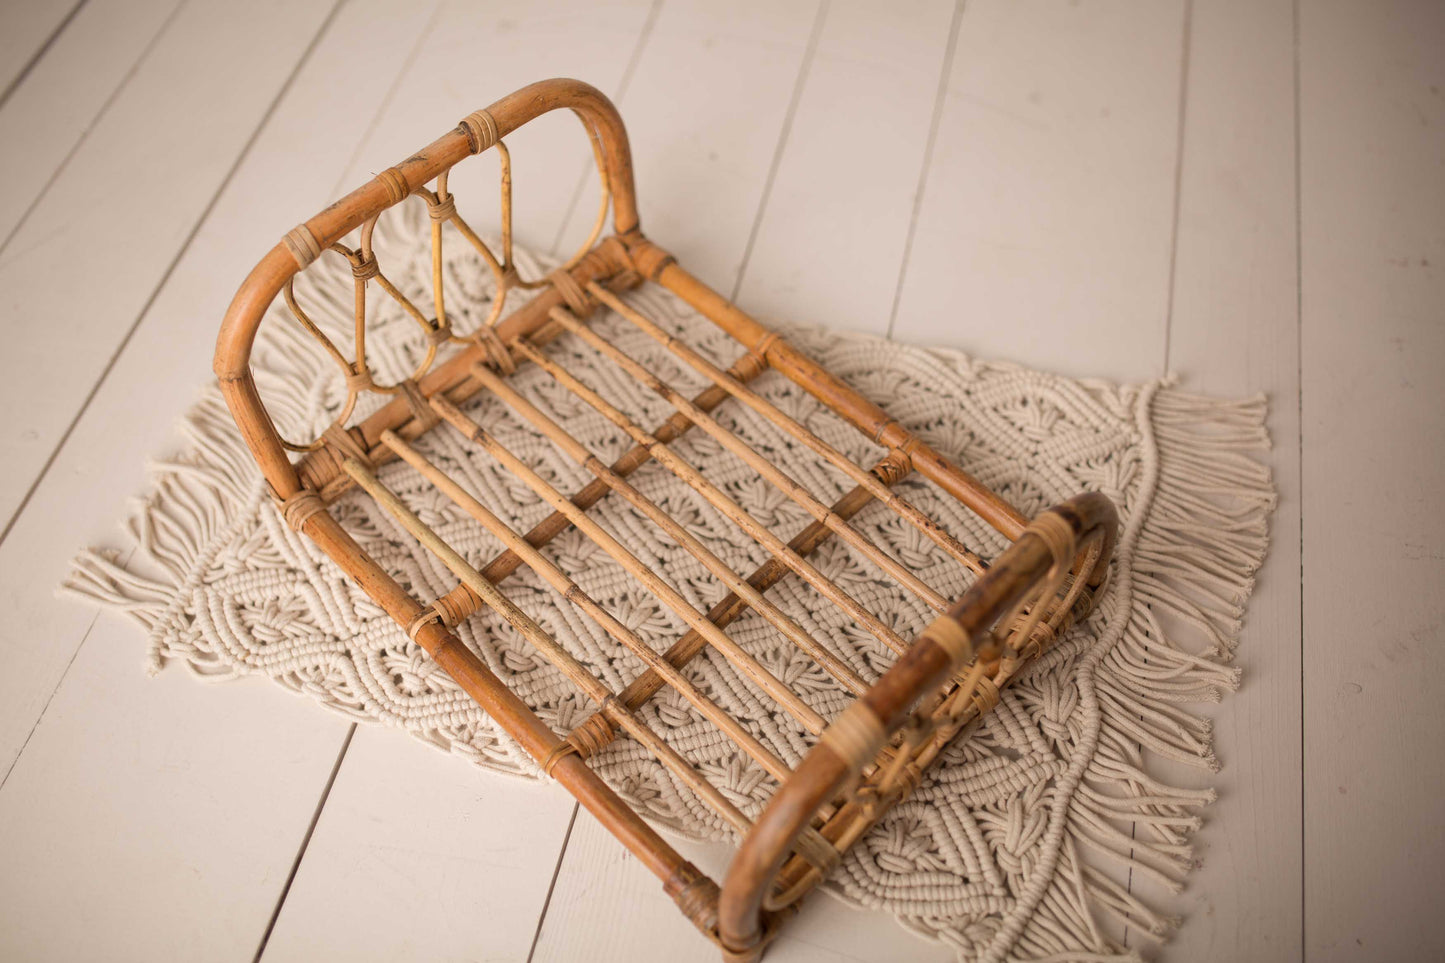 Jacob's Bamboo Low Bed